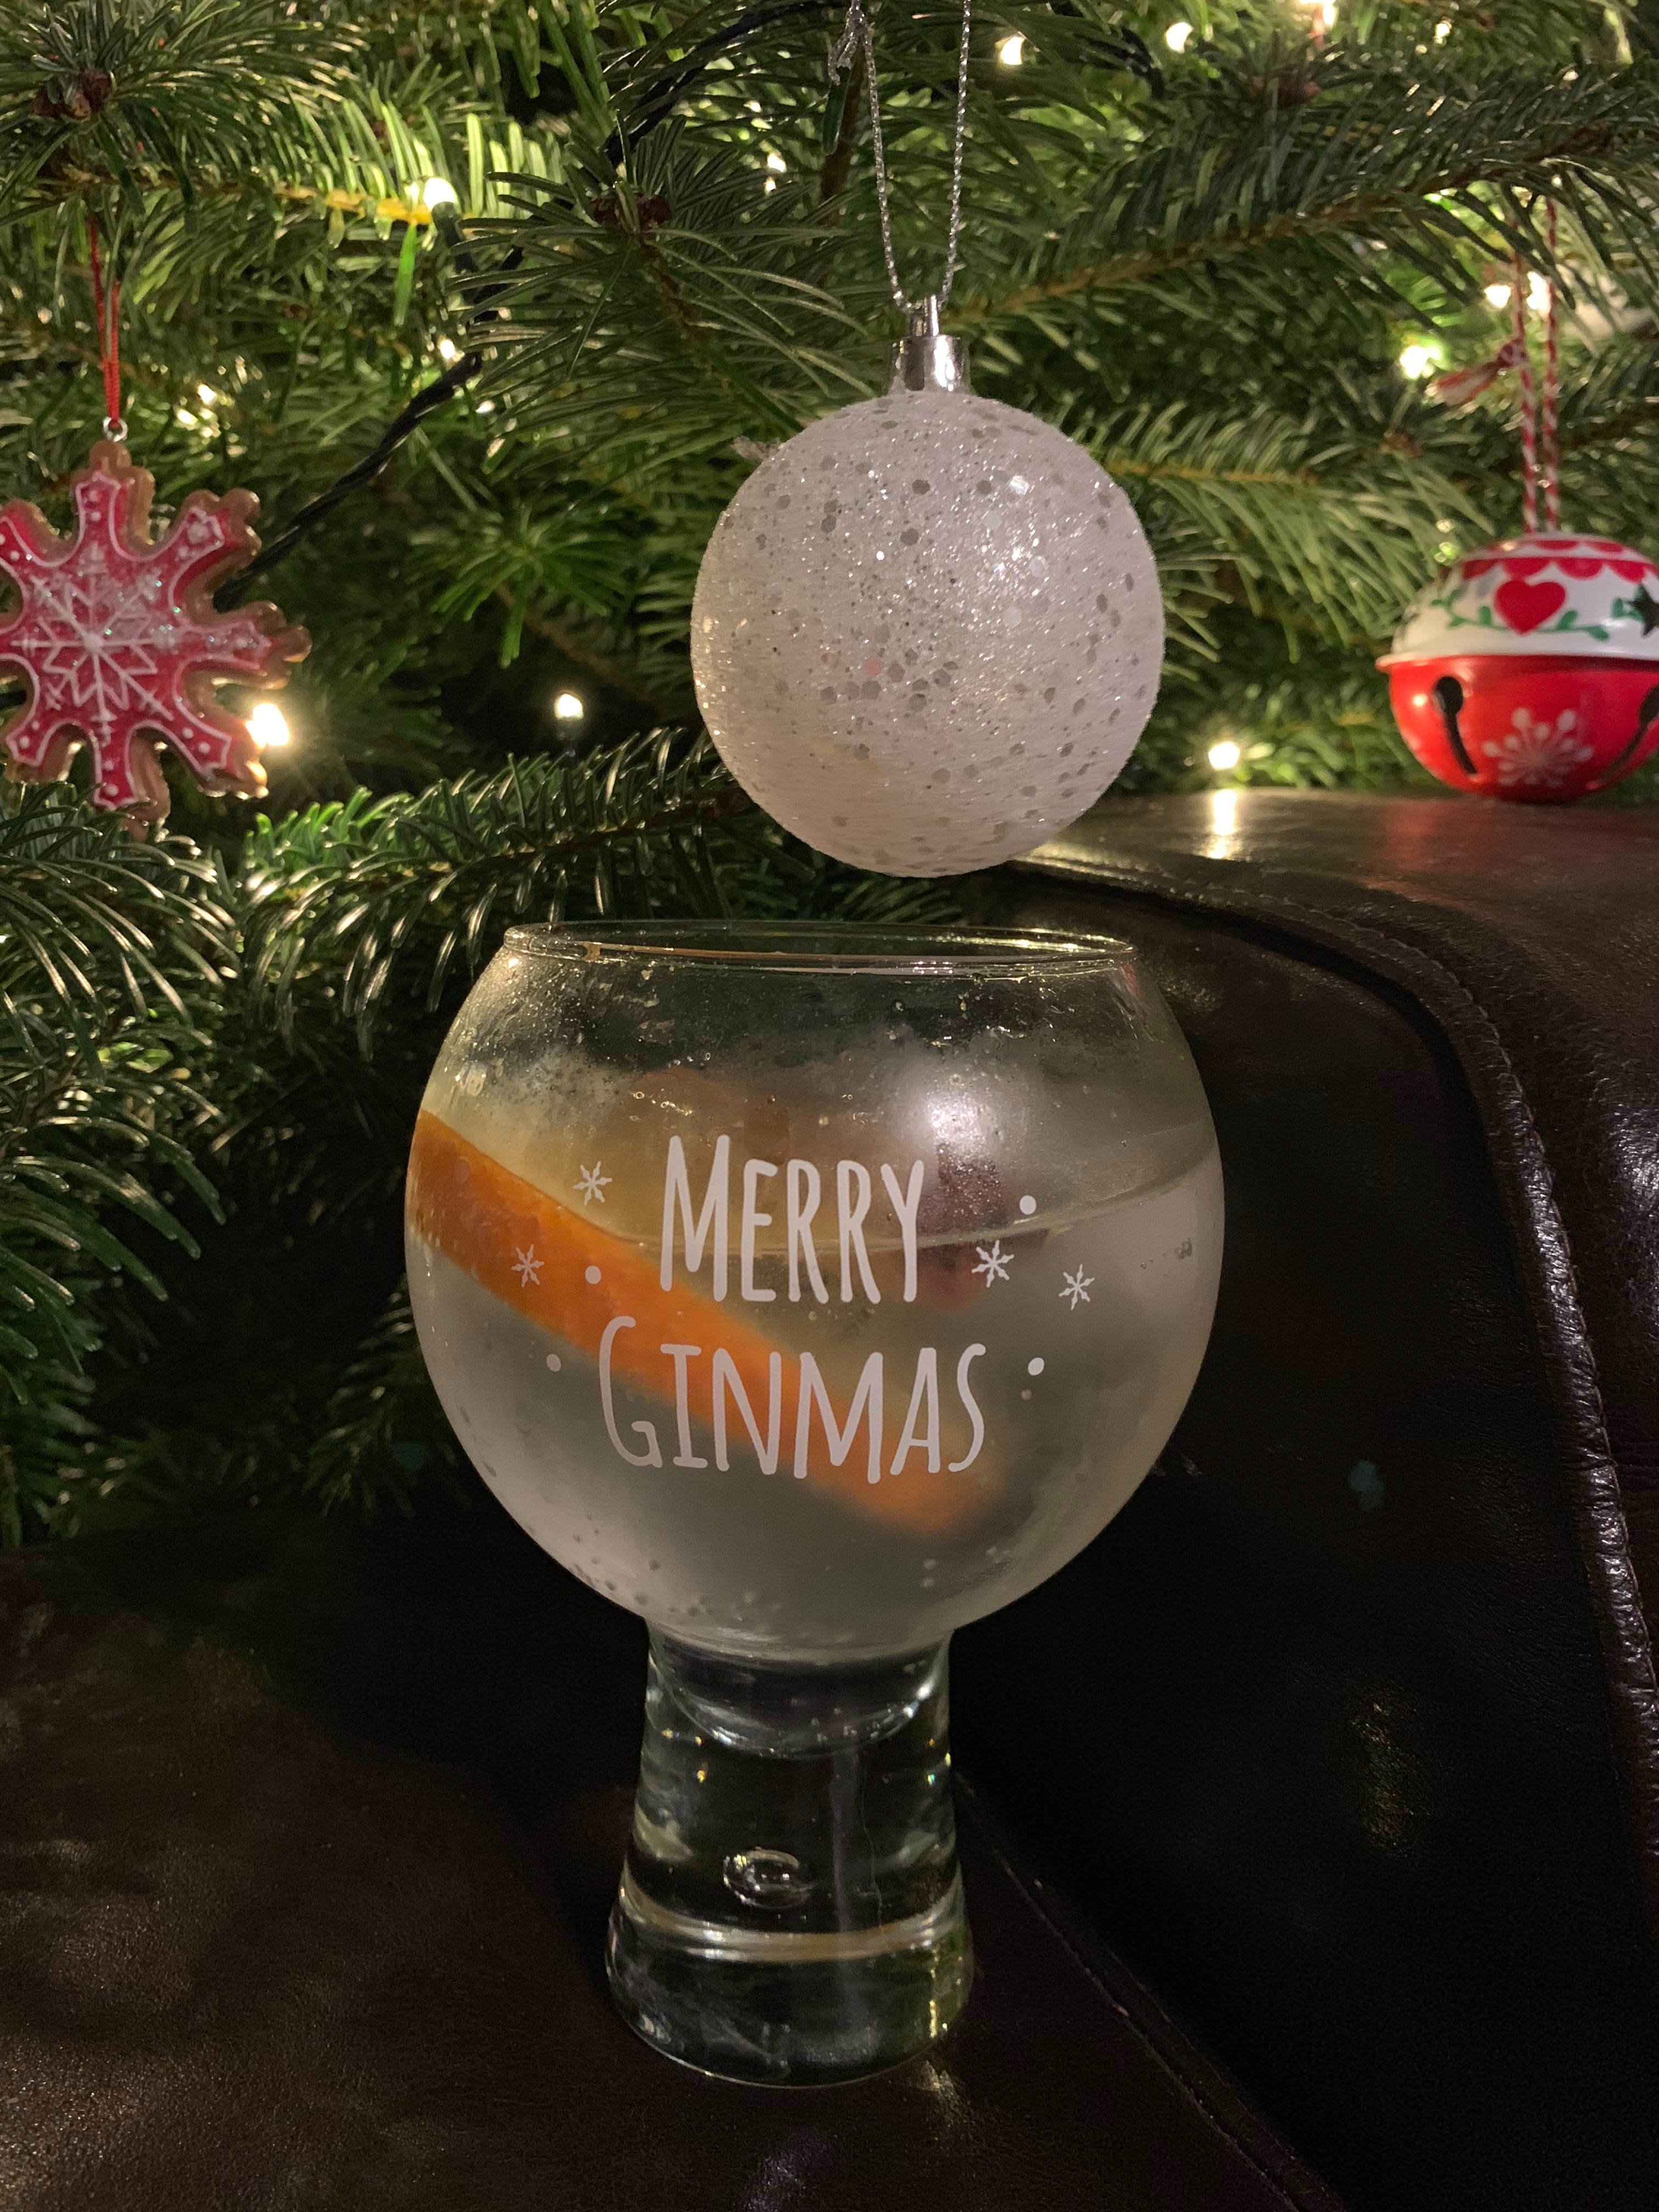 Let the festivities Be-Gin!